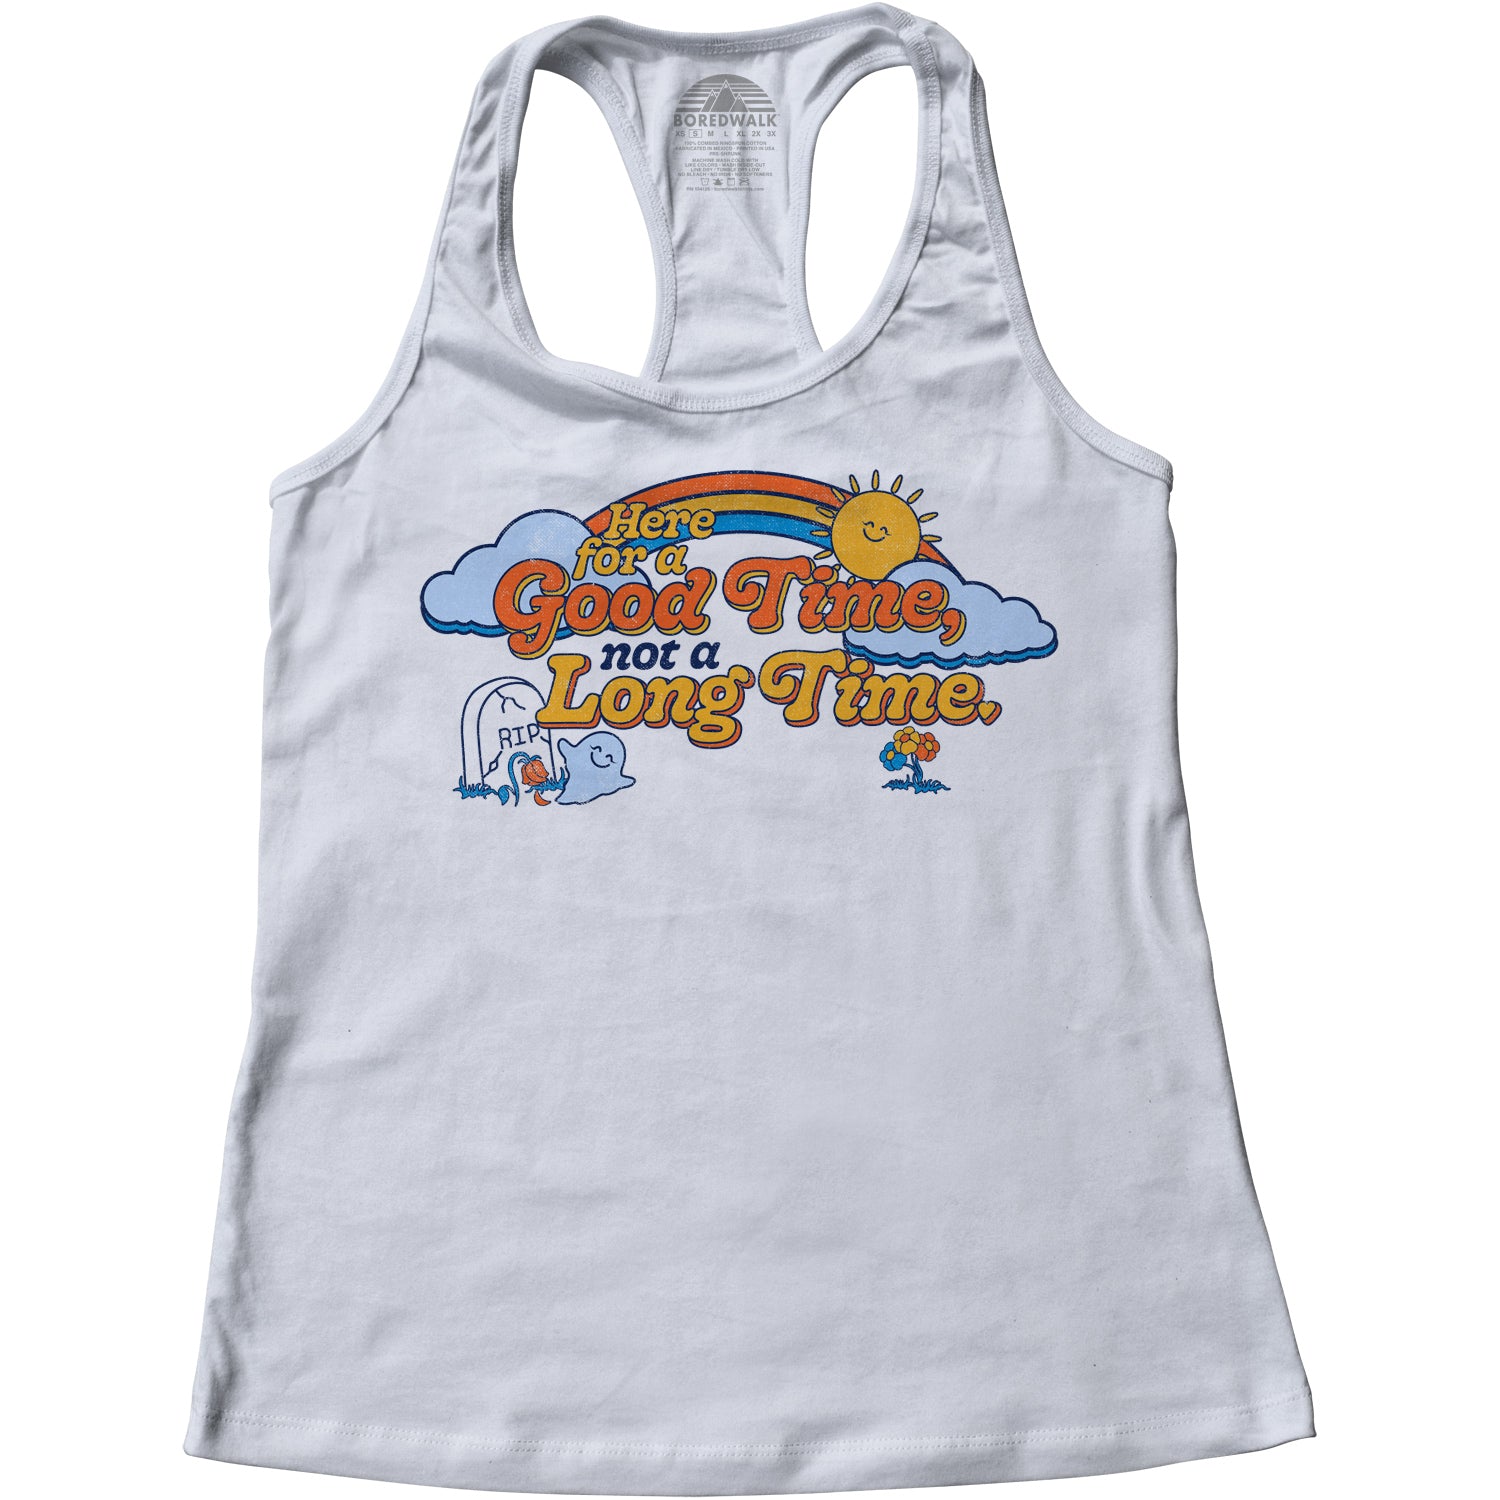 Women's Here for a Good Time Not a Long Time Racerback Tank Top